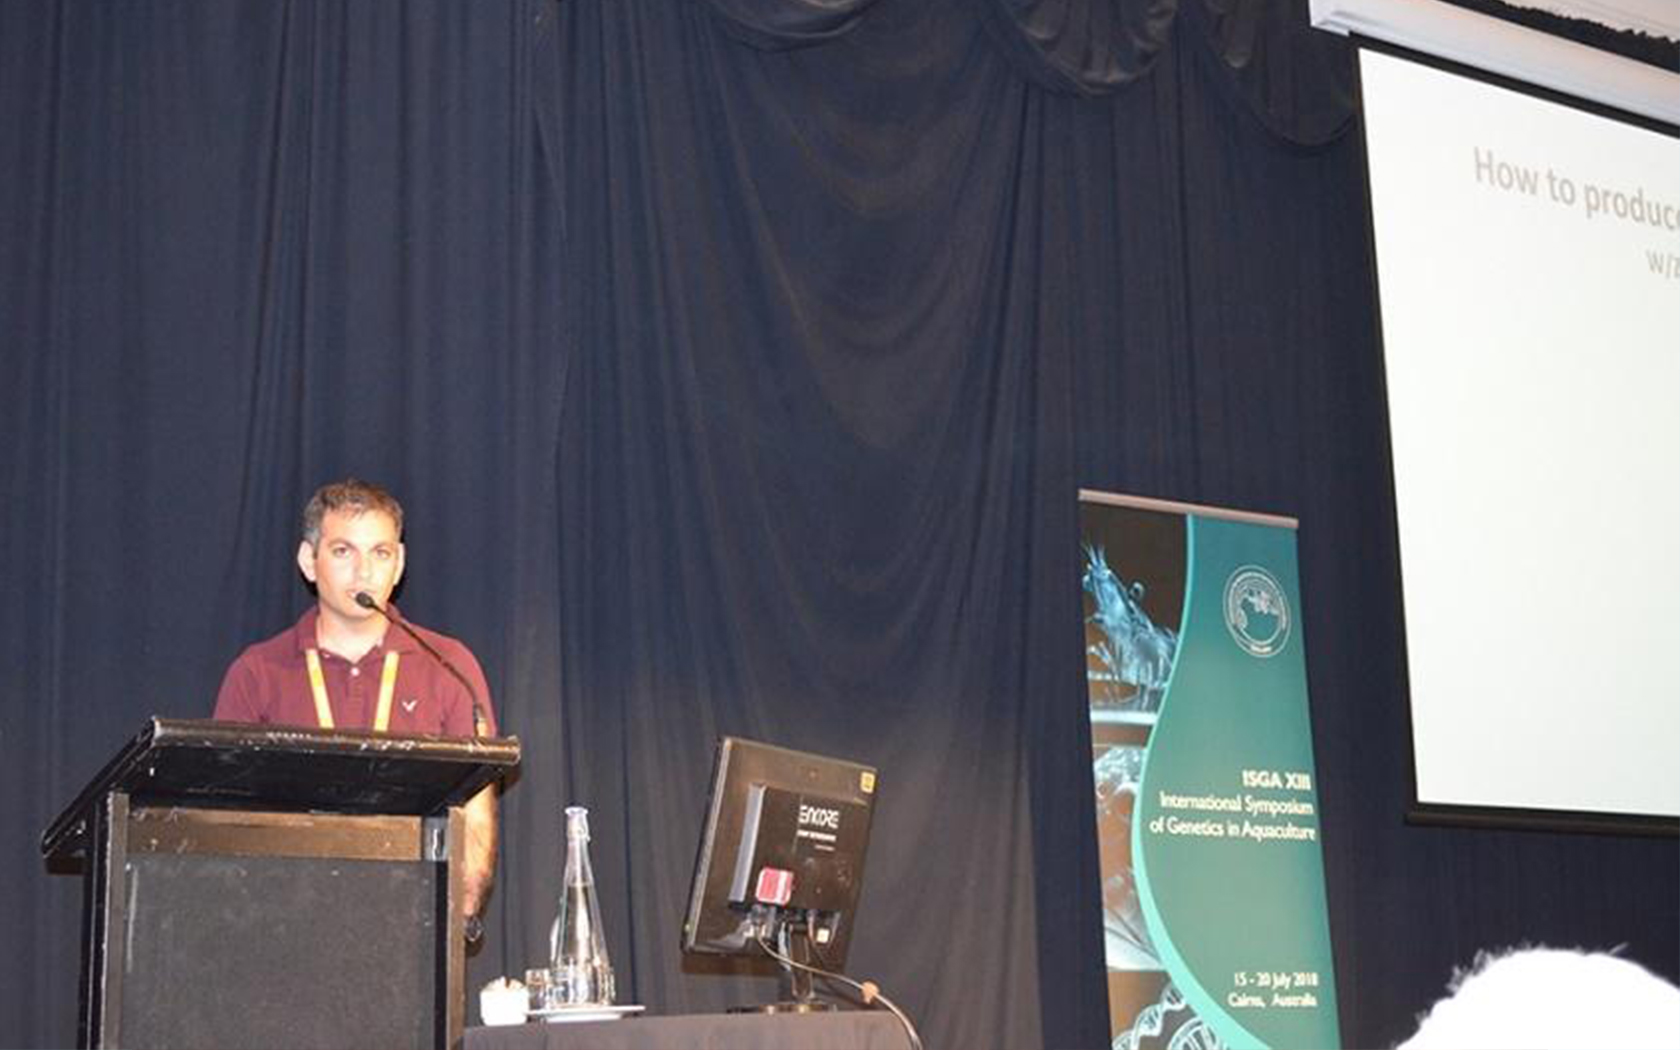 Tom attended the International Symposium of Genetics in Aquaculture in Cairns, Australia